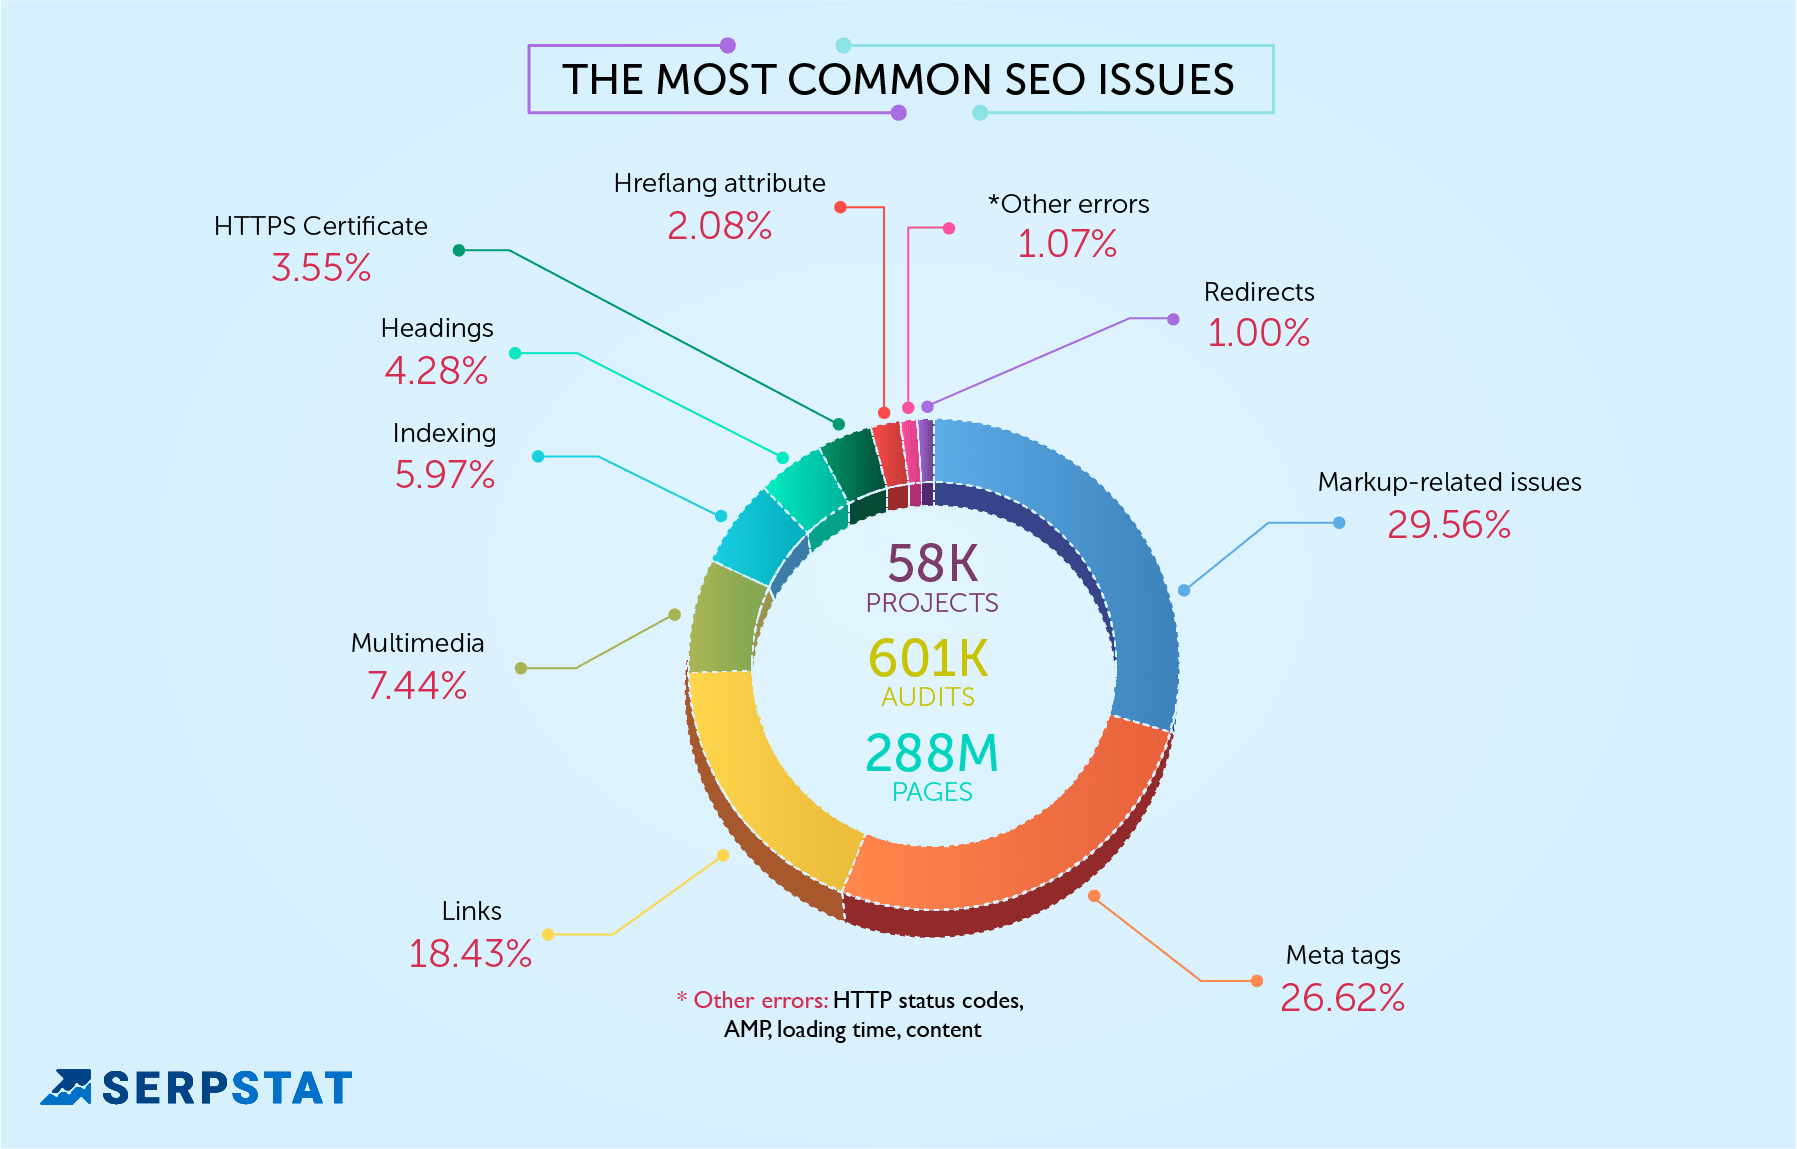 The most common SEO issues